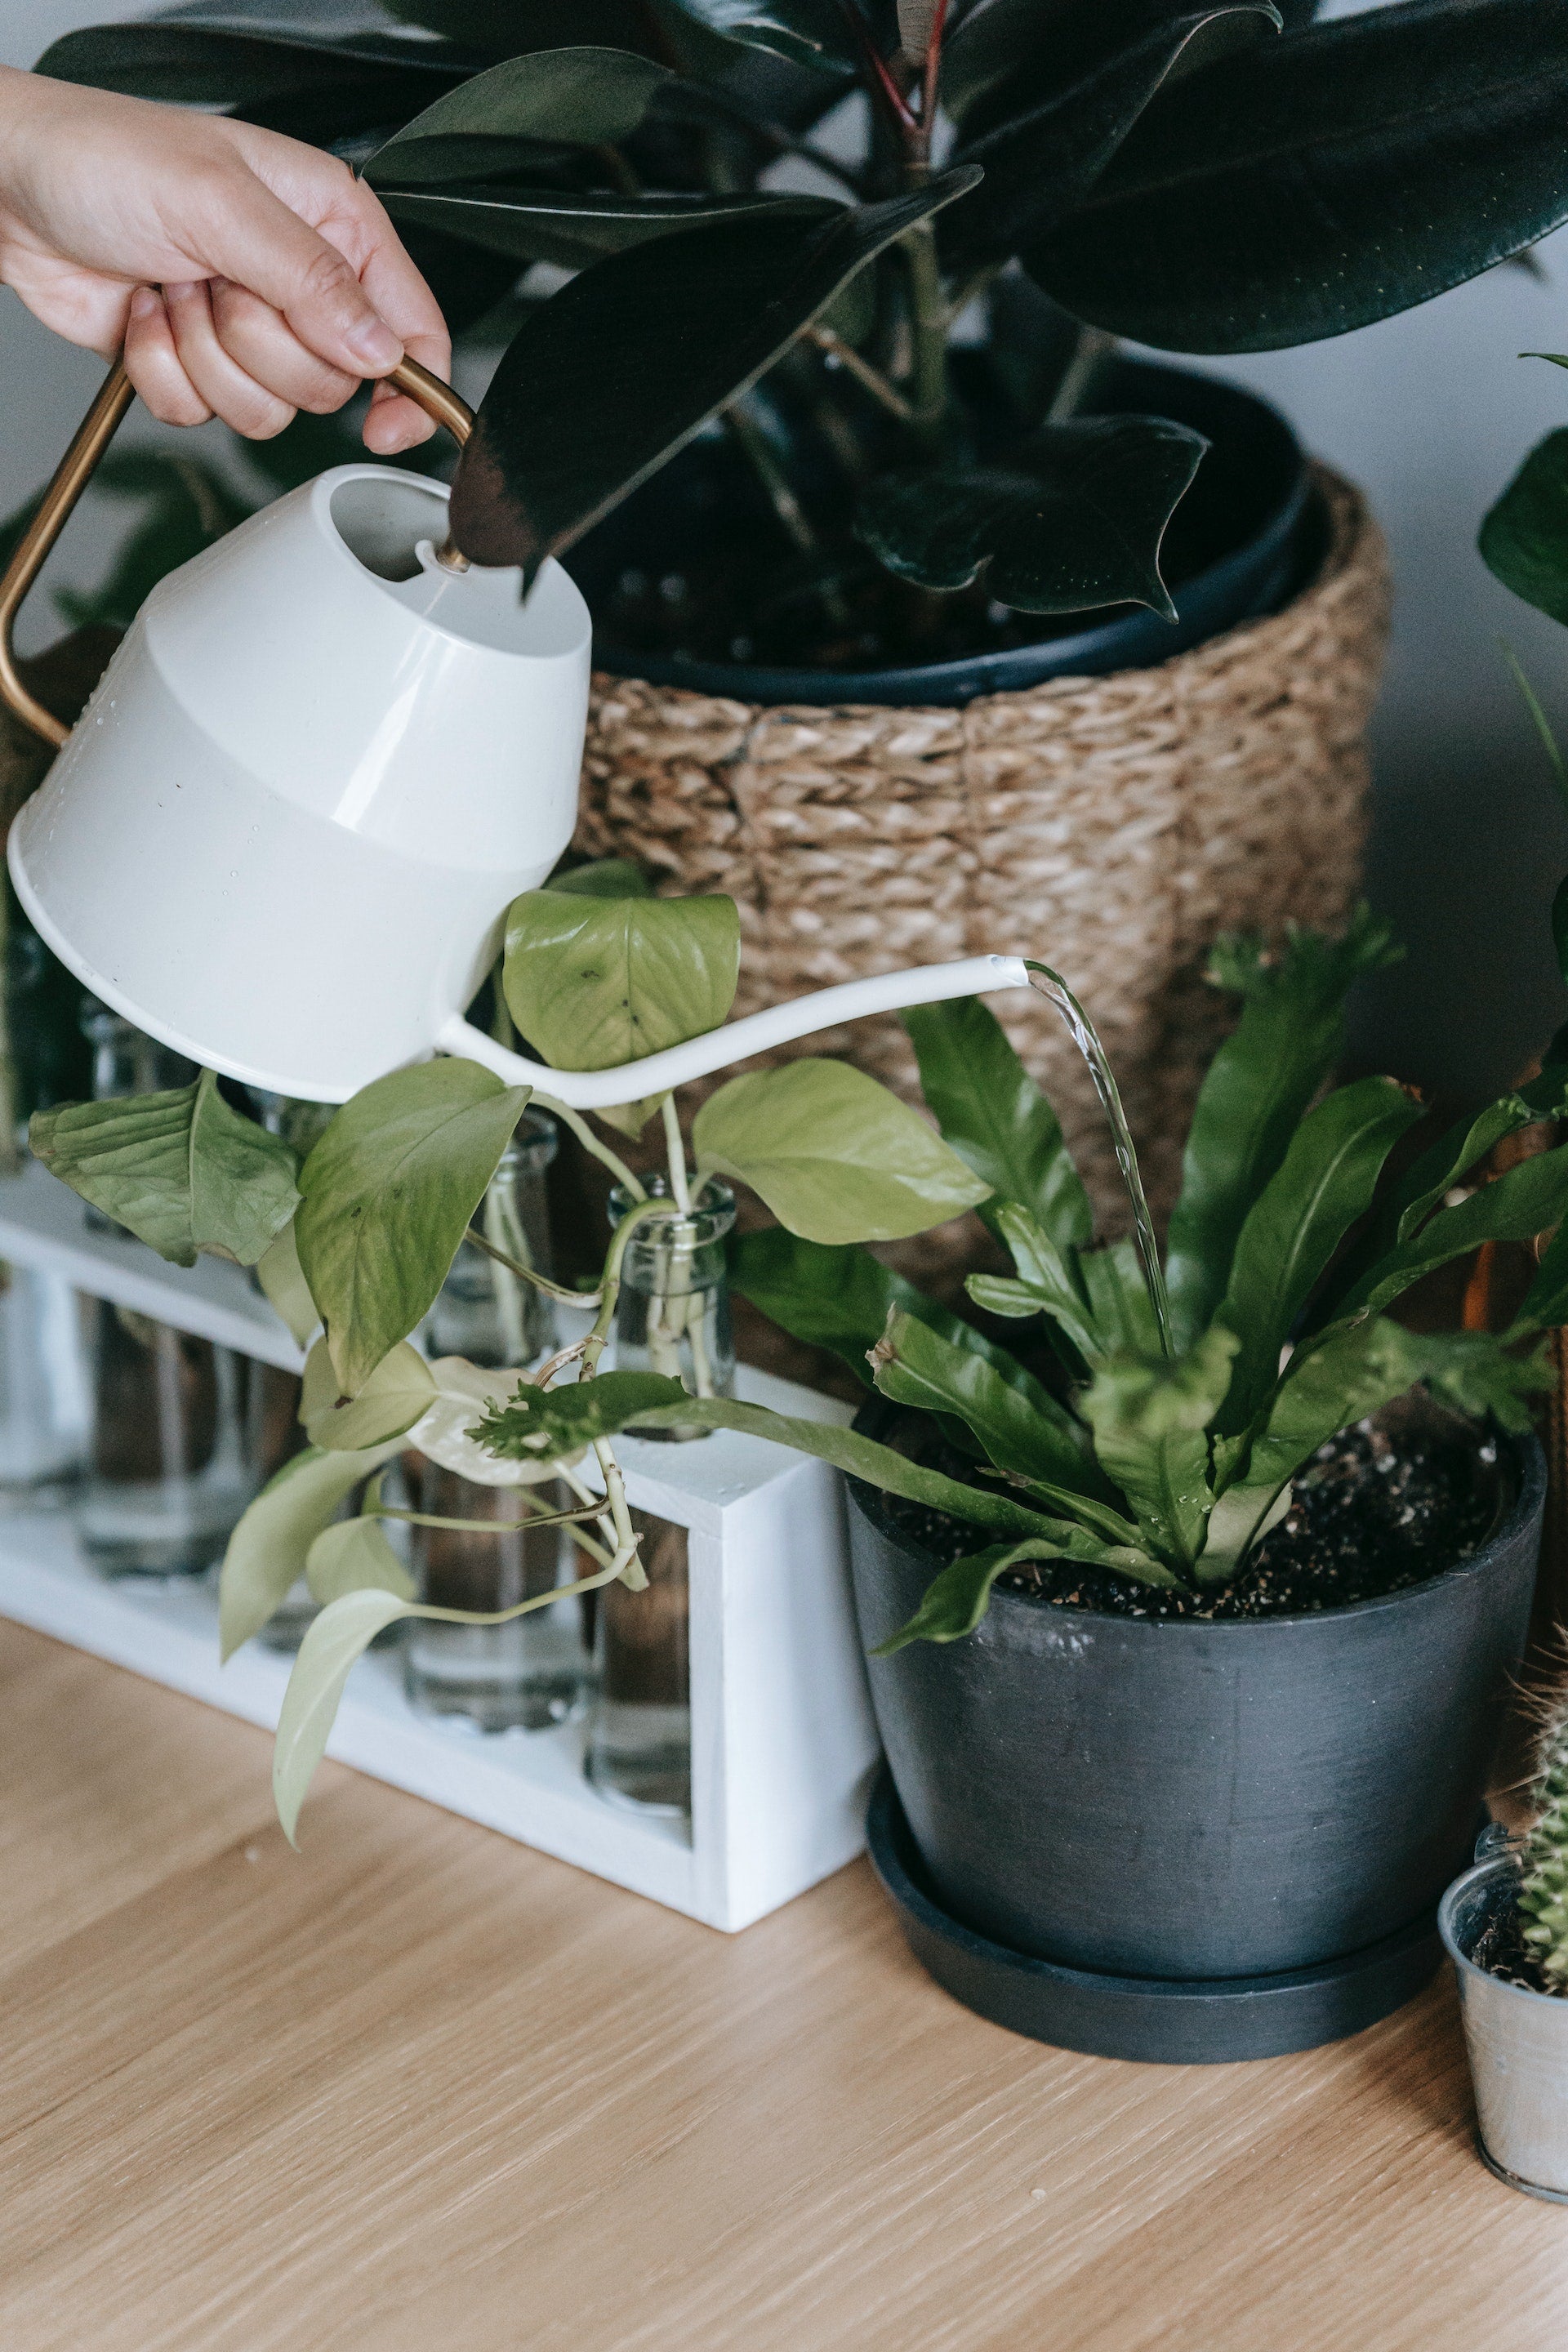 Is a Watering Can or Sprayer Best for Watering My Houseplants?